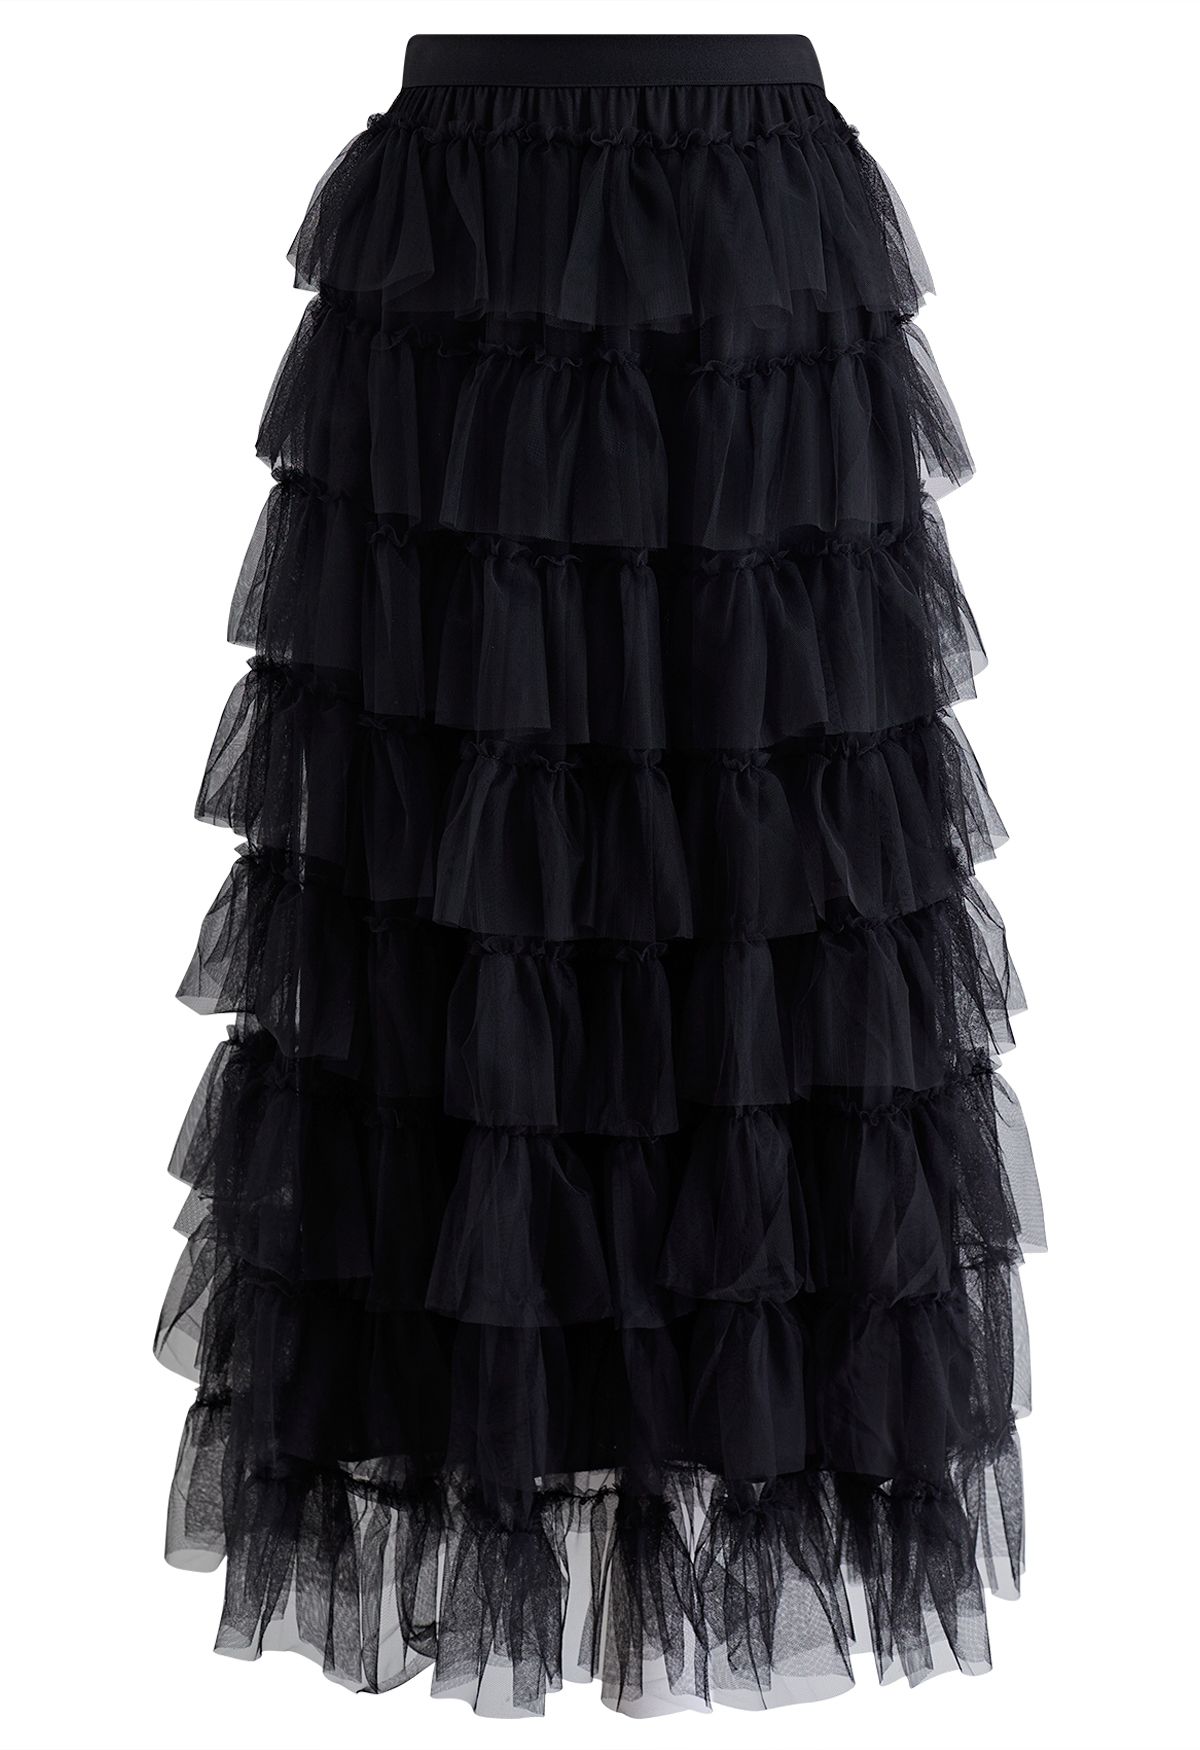 Ruffle Tiered Tulle Mesh Maxi Skirt in Black - Retro, Indie and Unique ...